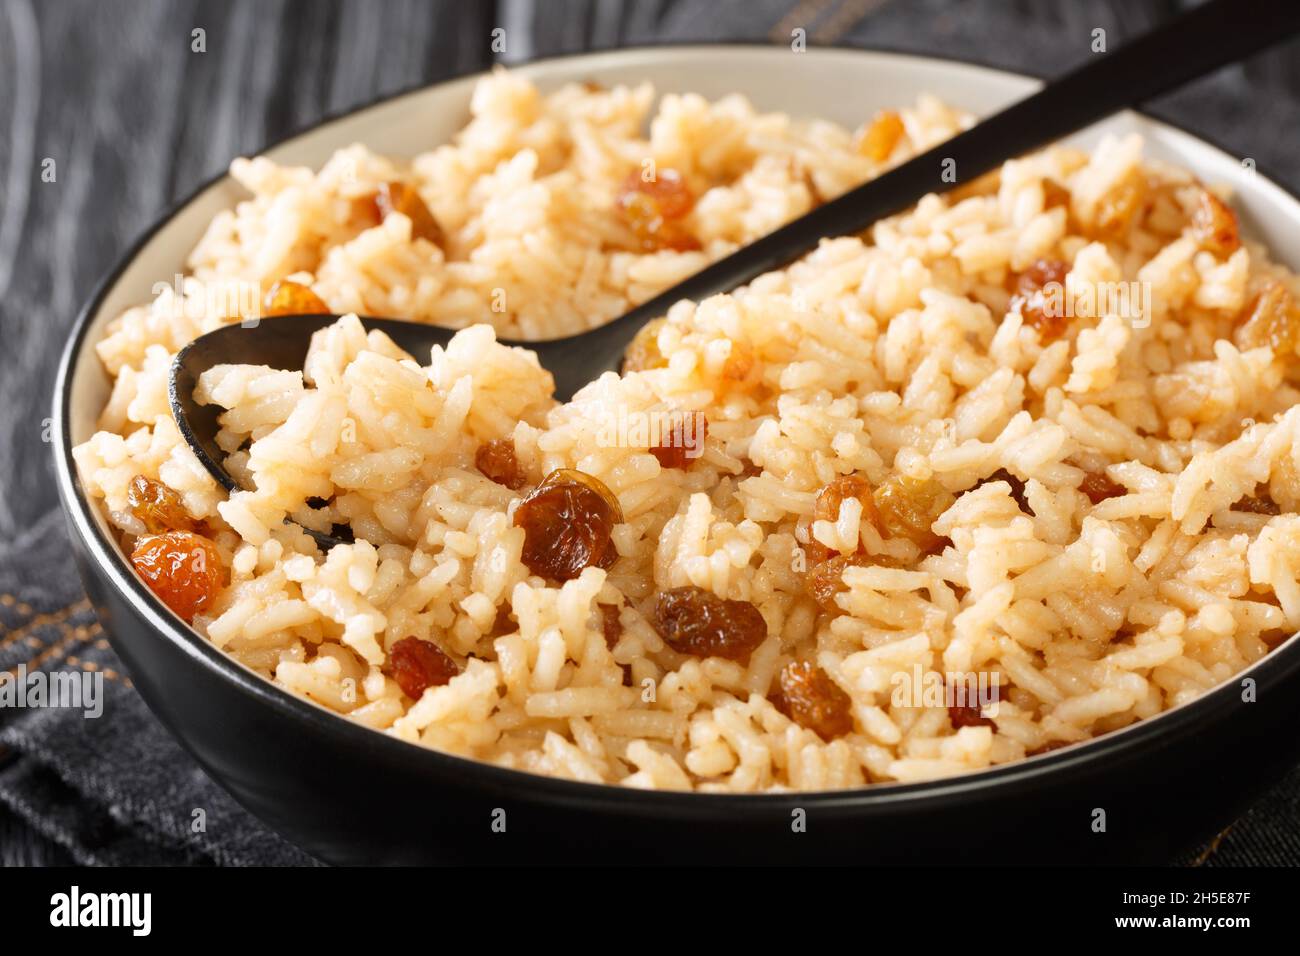 Arroz con coco is a flavorful Colombian side dish consisting of rice, coconut, sugar, salt, and raisins close-up in a bowl on the table. horizontal Stock Photo